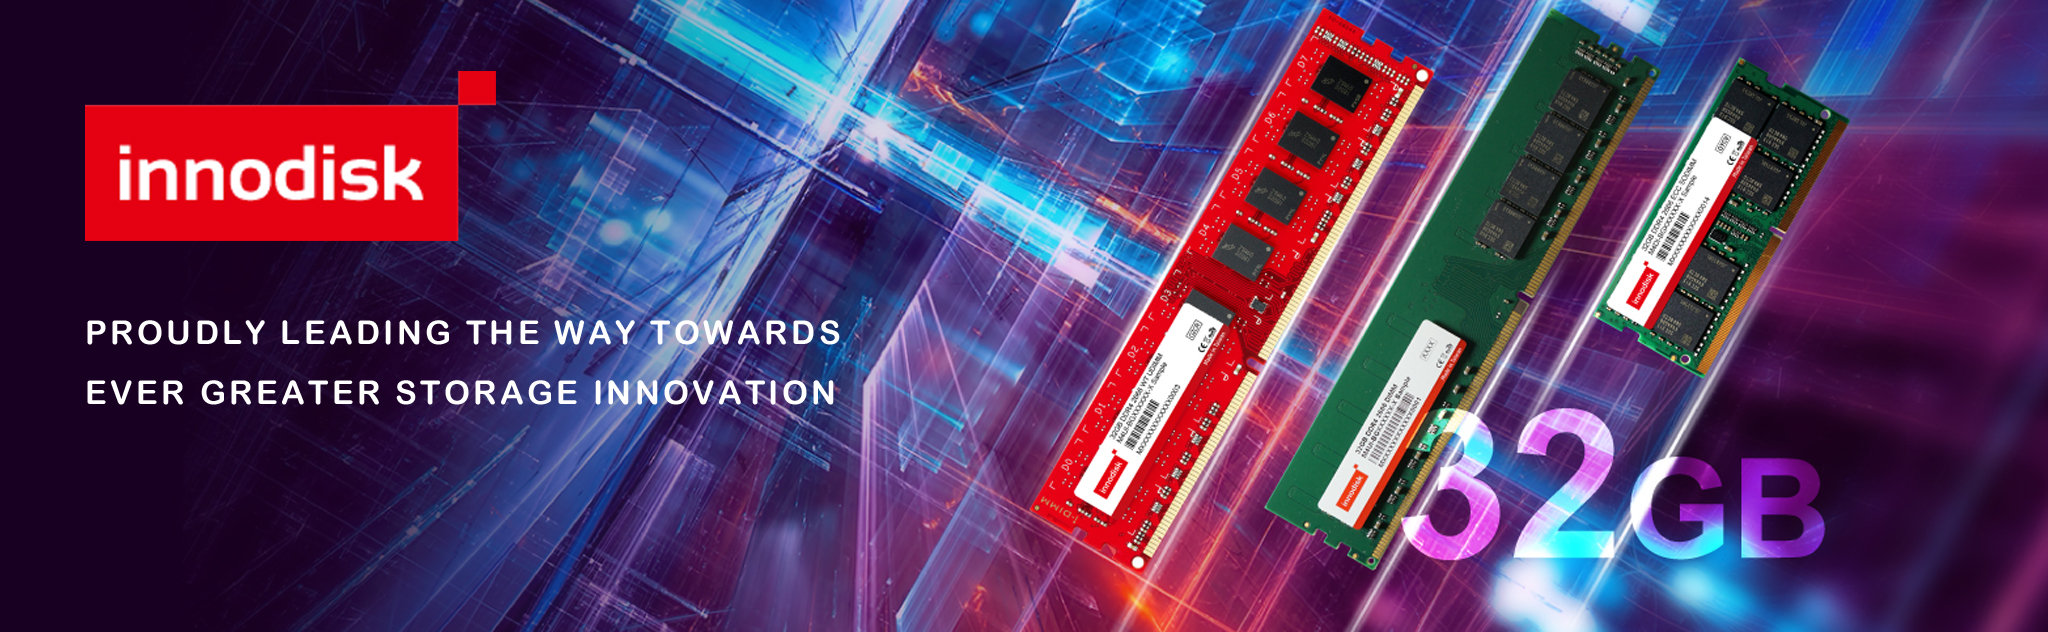 Innodisk industrial embedded flash and memory solutions